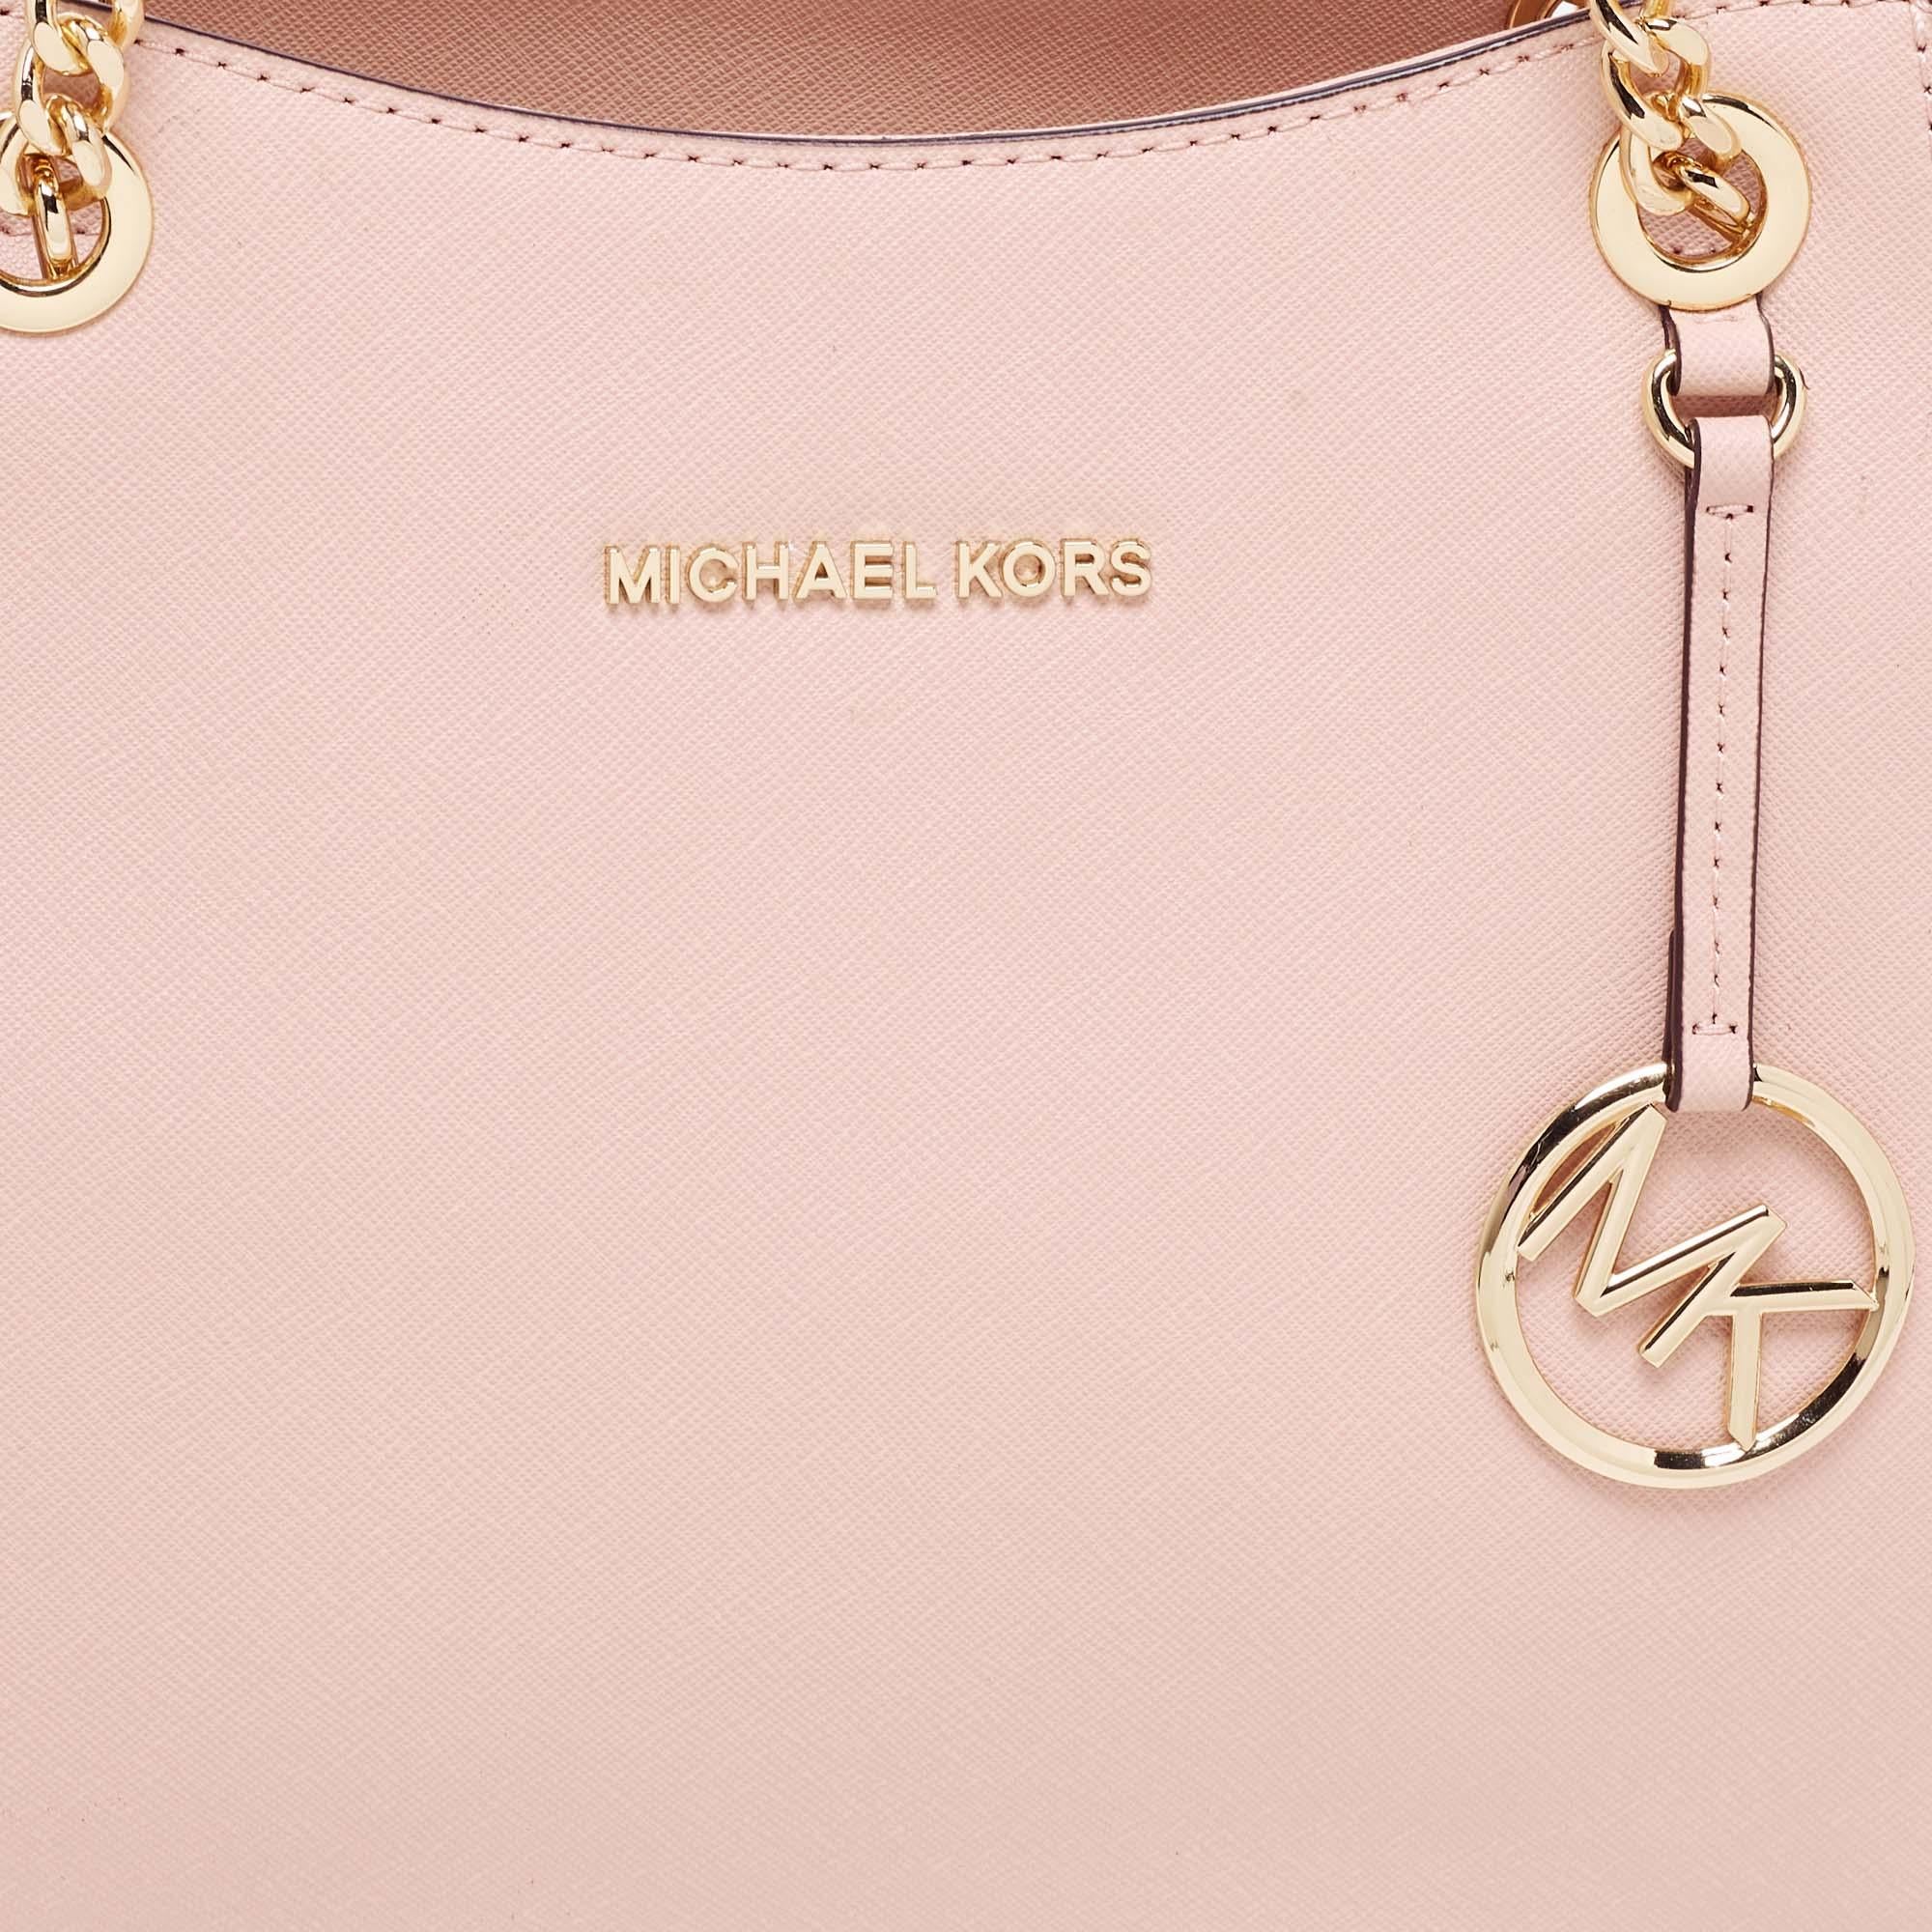 Michael Kors Pink Saffiano Leather Jet Set Travel Chain Tote 3